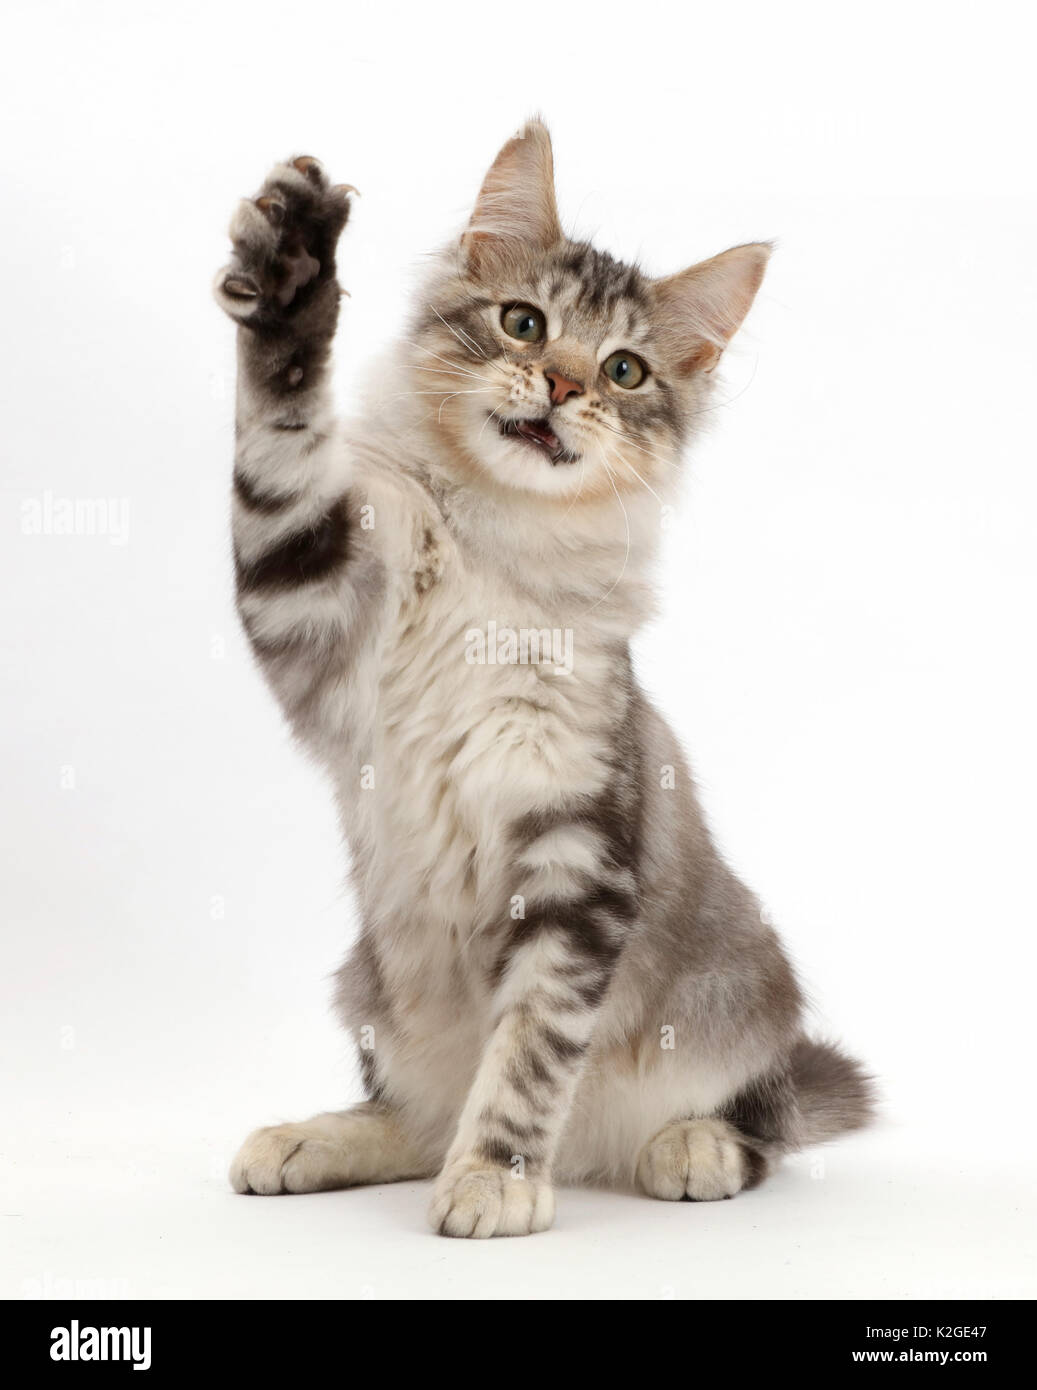 Silver tabby kitten, Loki, age 3 months, with raised paw. Stock Photo